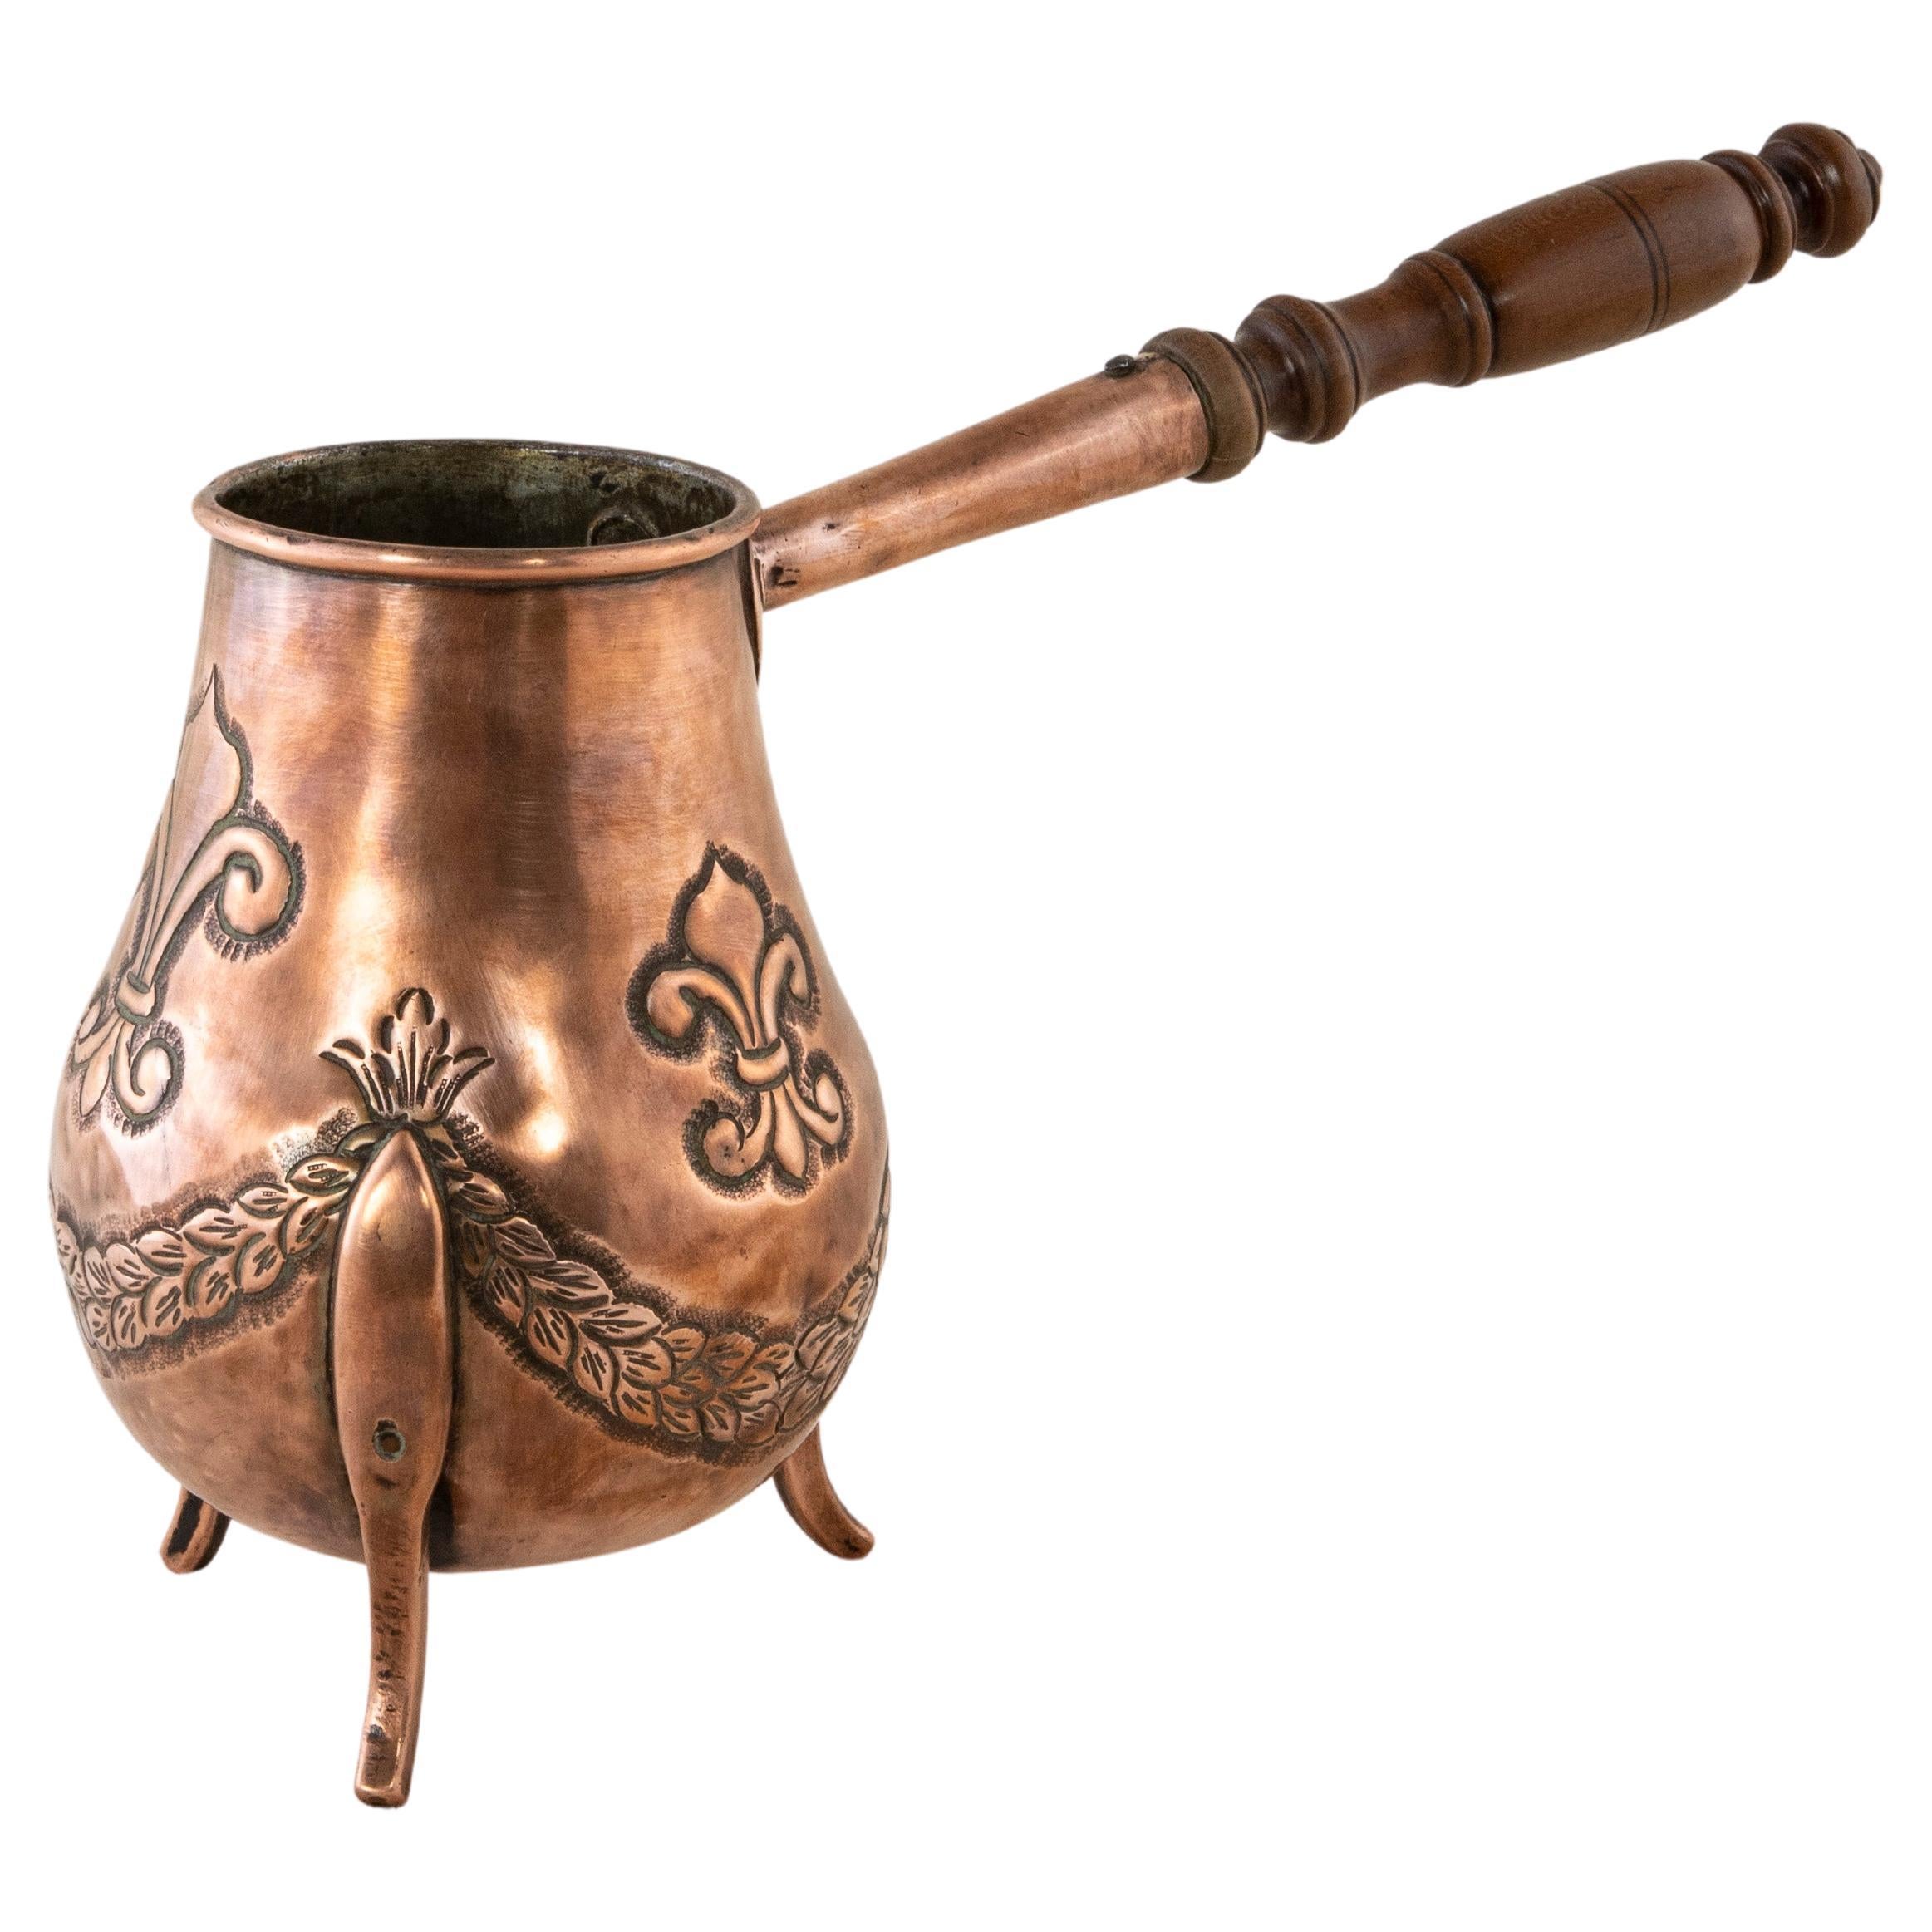 Early 19th Century French Copper Repousse Chocolate Pot from a French Chateau